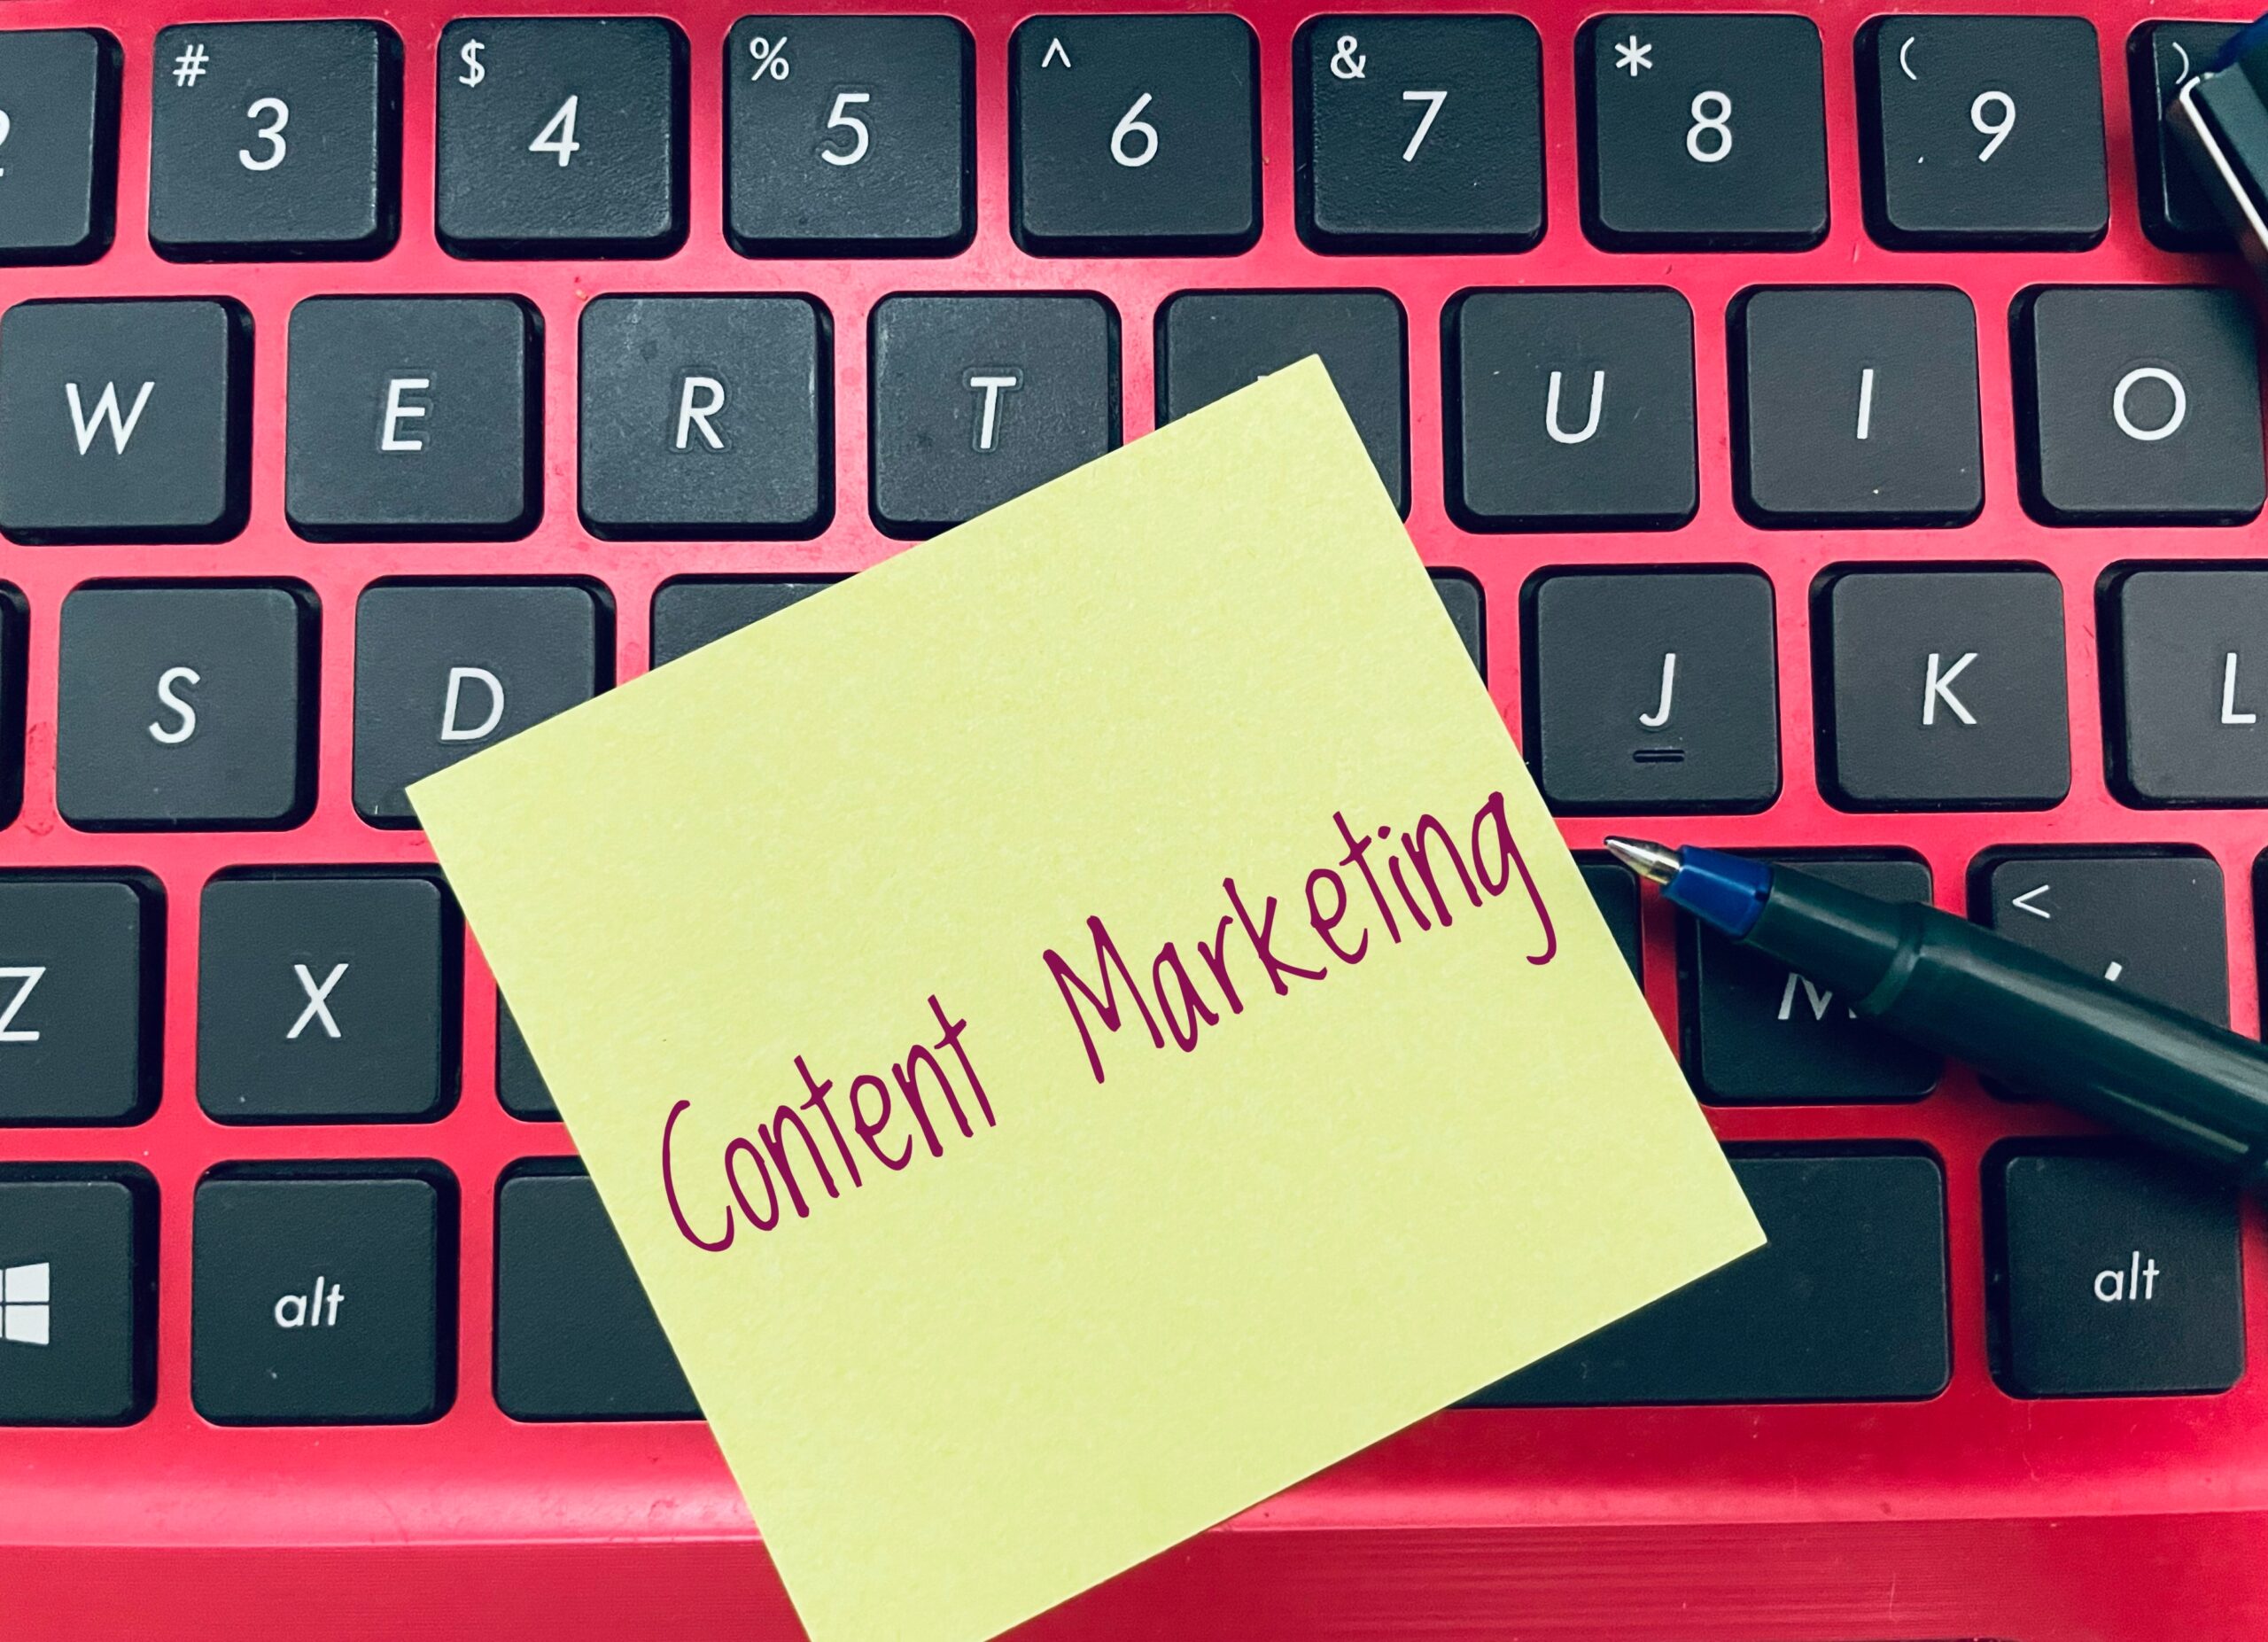 Laptop of digital marketer with a posit note on the keyboard that reads "content marketing".